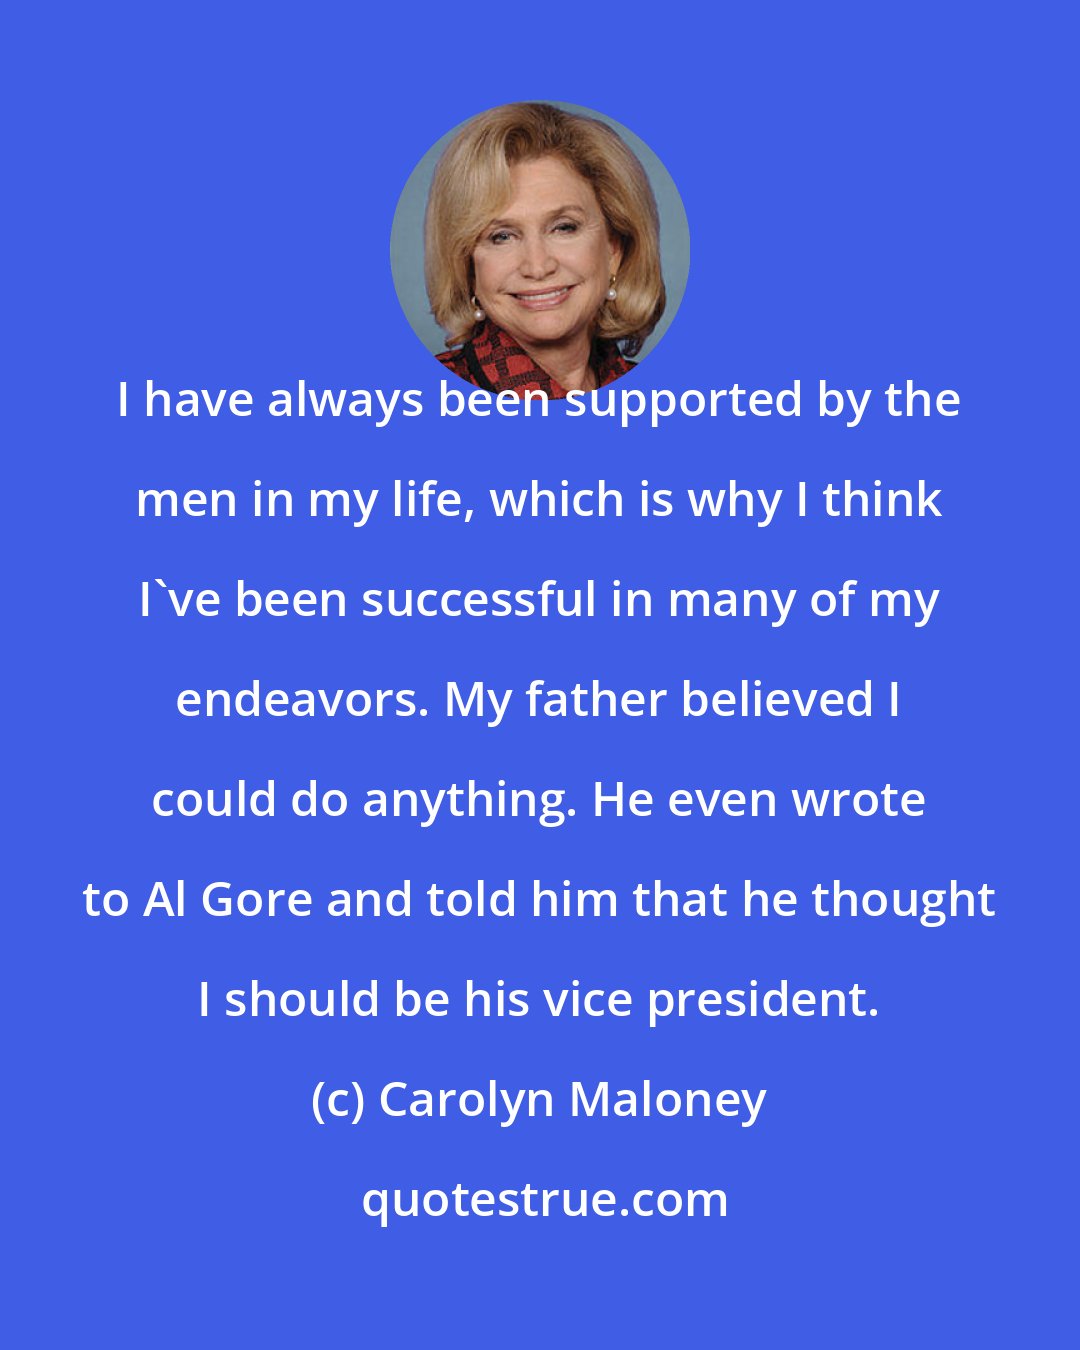 Carolyn Maloney: I have always been supported by the men in my life, which is why I think I've been successful in many of my endeavors. My father believed I could do anything. He even wrote to Al Gore and told him that he thought I should be his vice president.